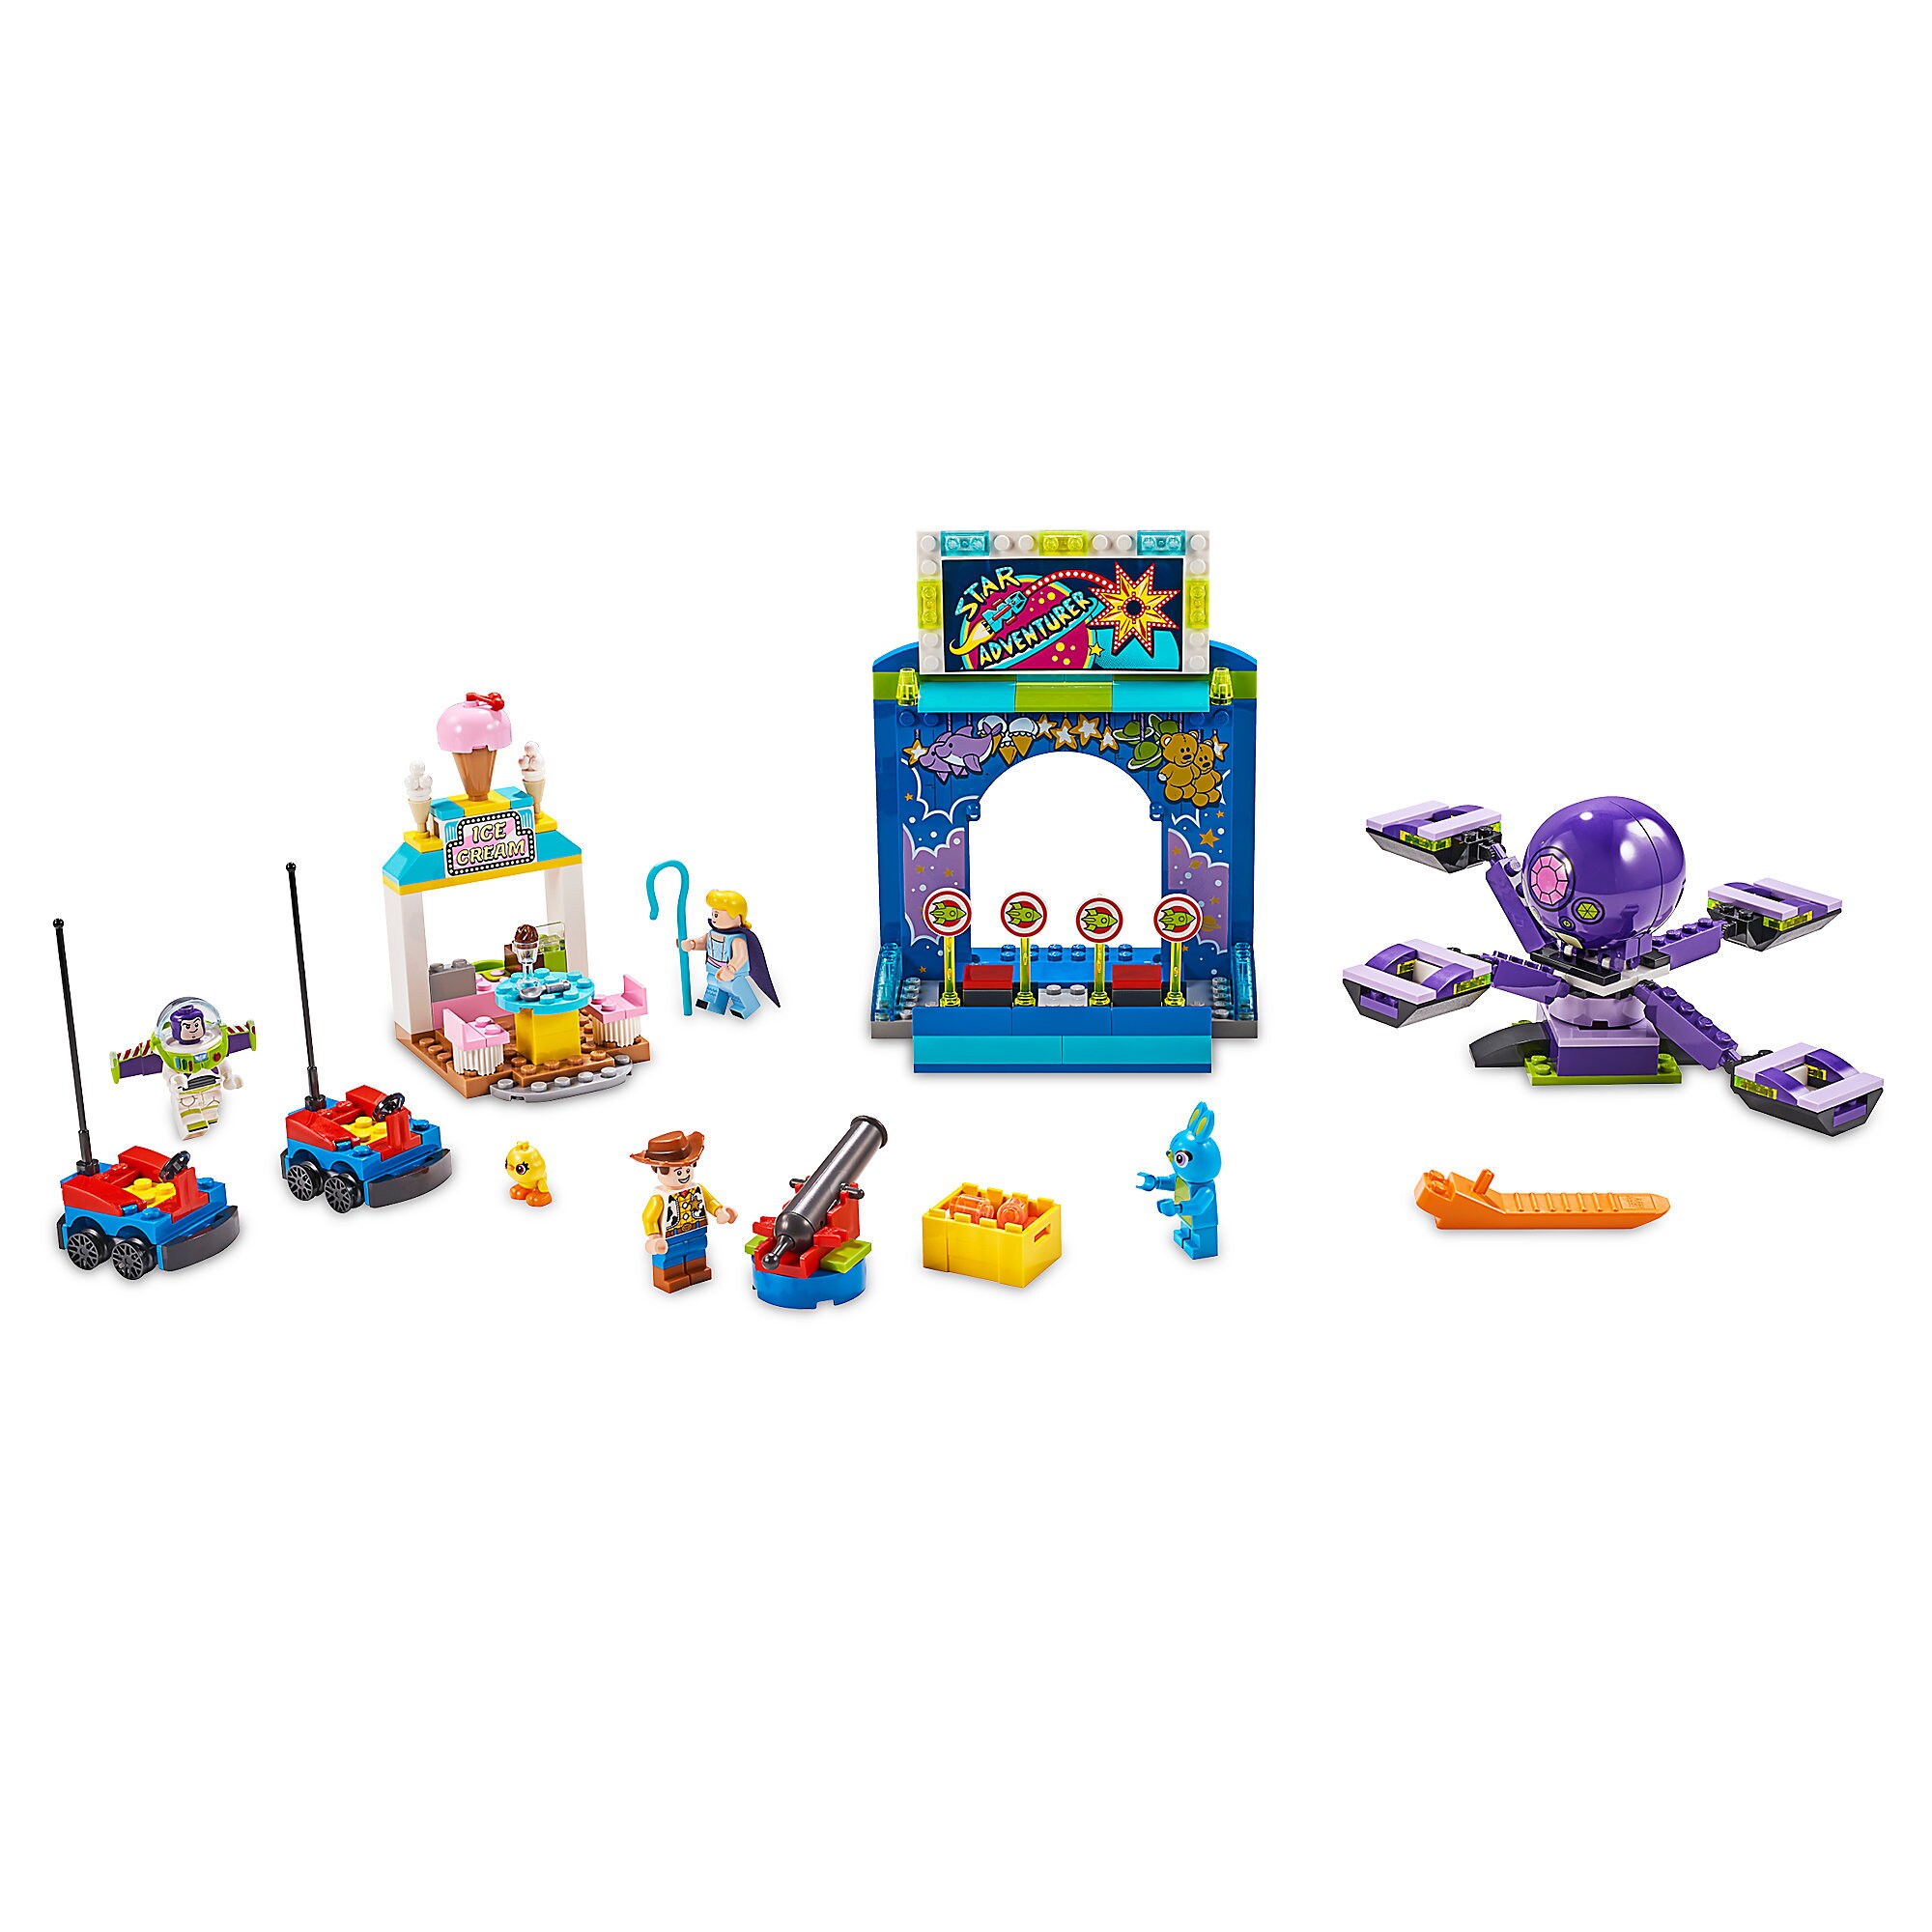 Buzz & Woody's Carnival Mania! Play Set by LEGO - Toy Story 4